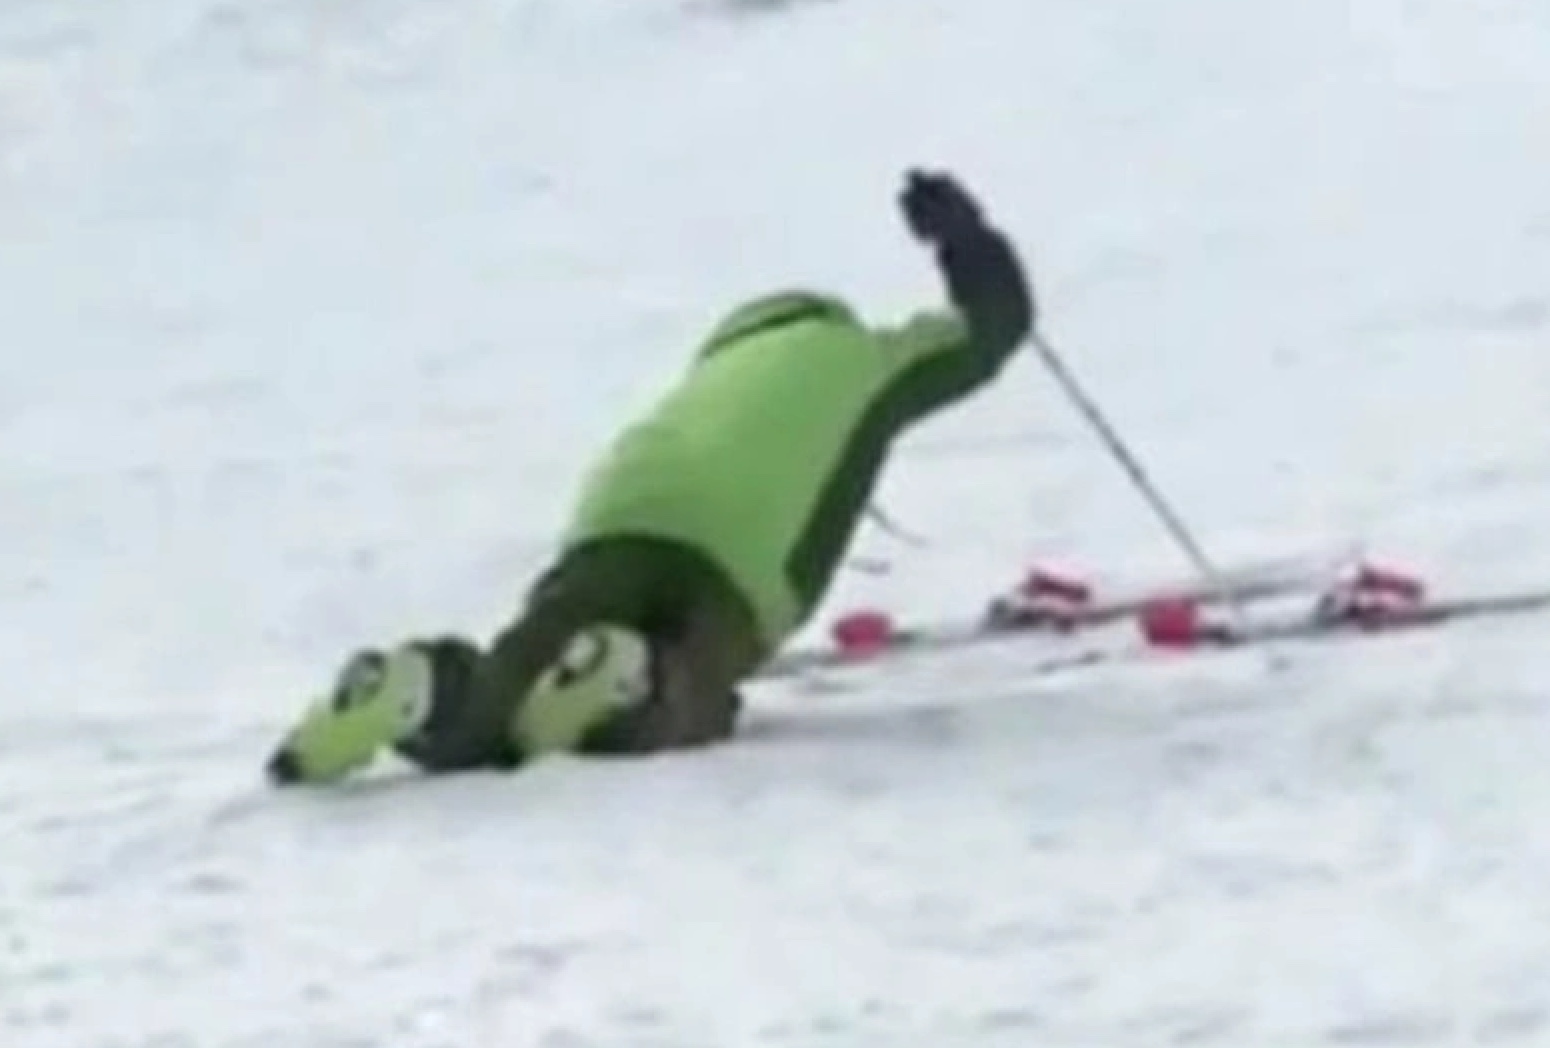 British Study Show Drinking & Skiing Is A Dangerous Combination (43% Crash Risk Increase)